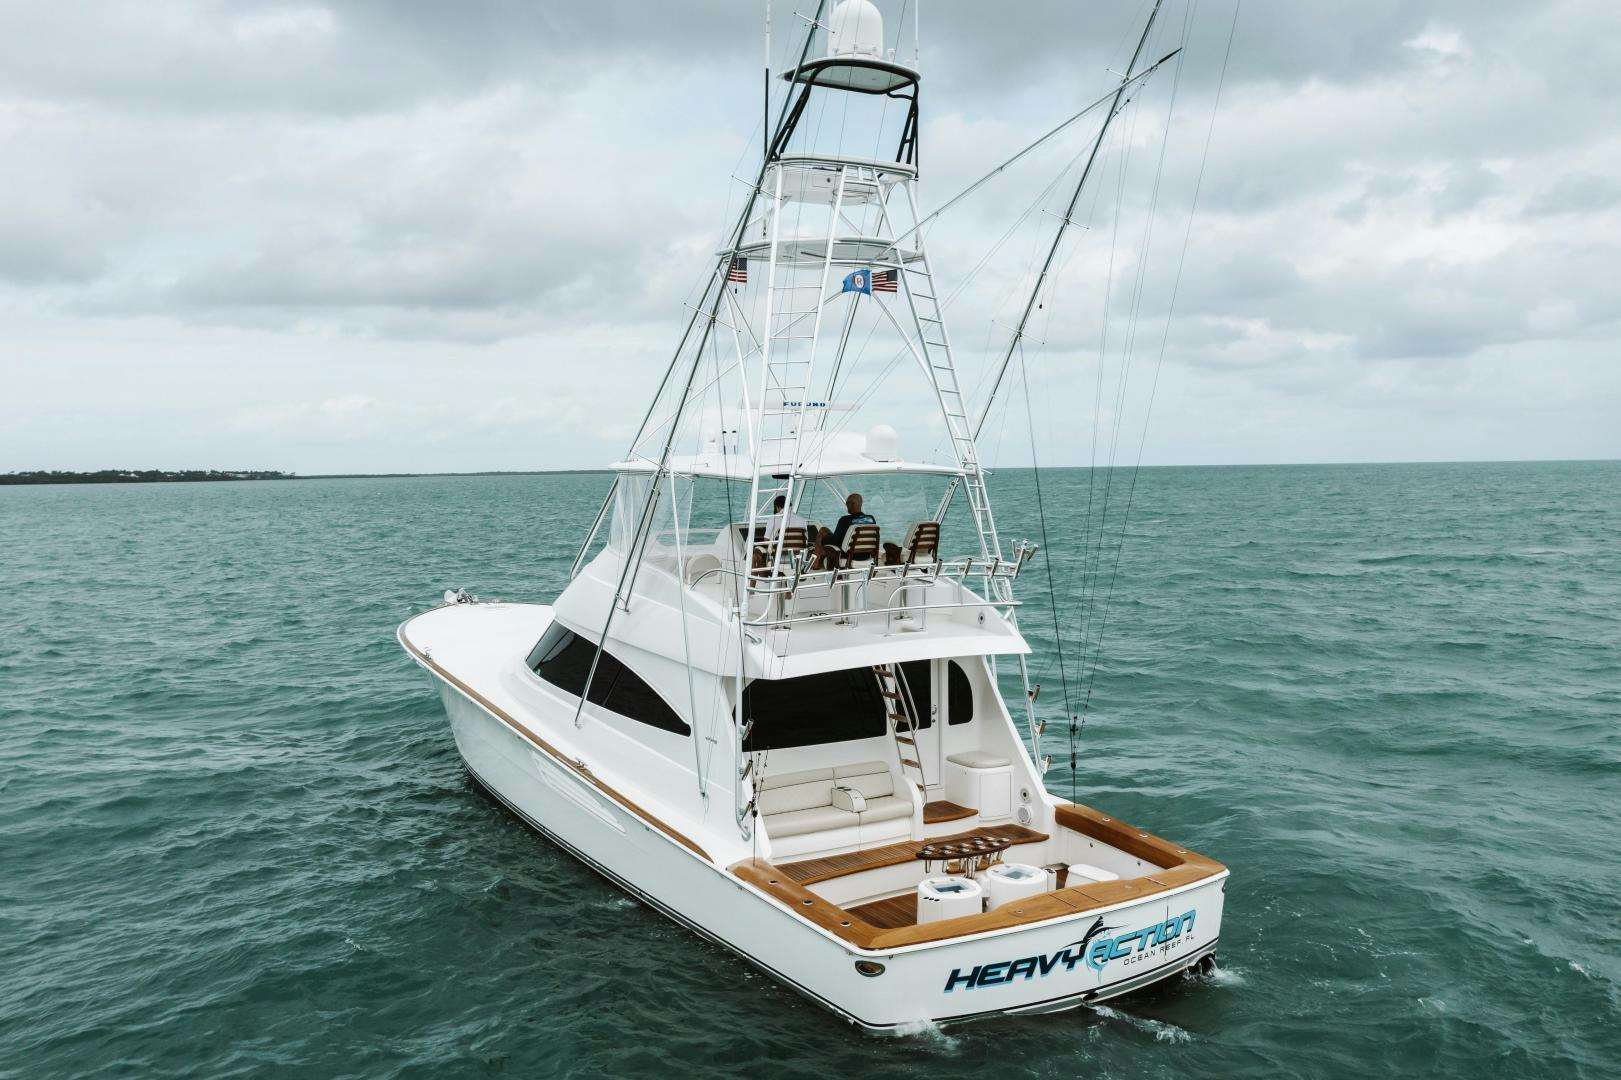 HEAVY ACTION Yacht for Sale in Key Largo, 68' 7 (20.9m) 2021 Viking